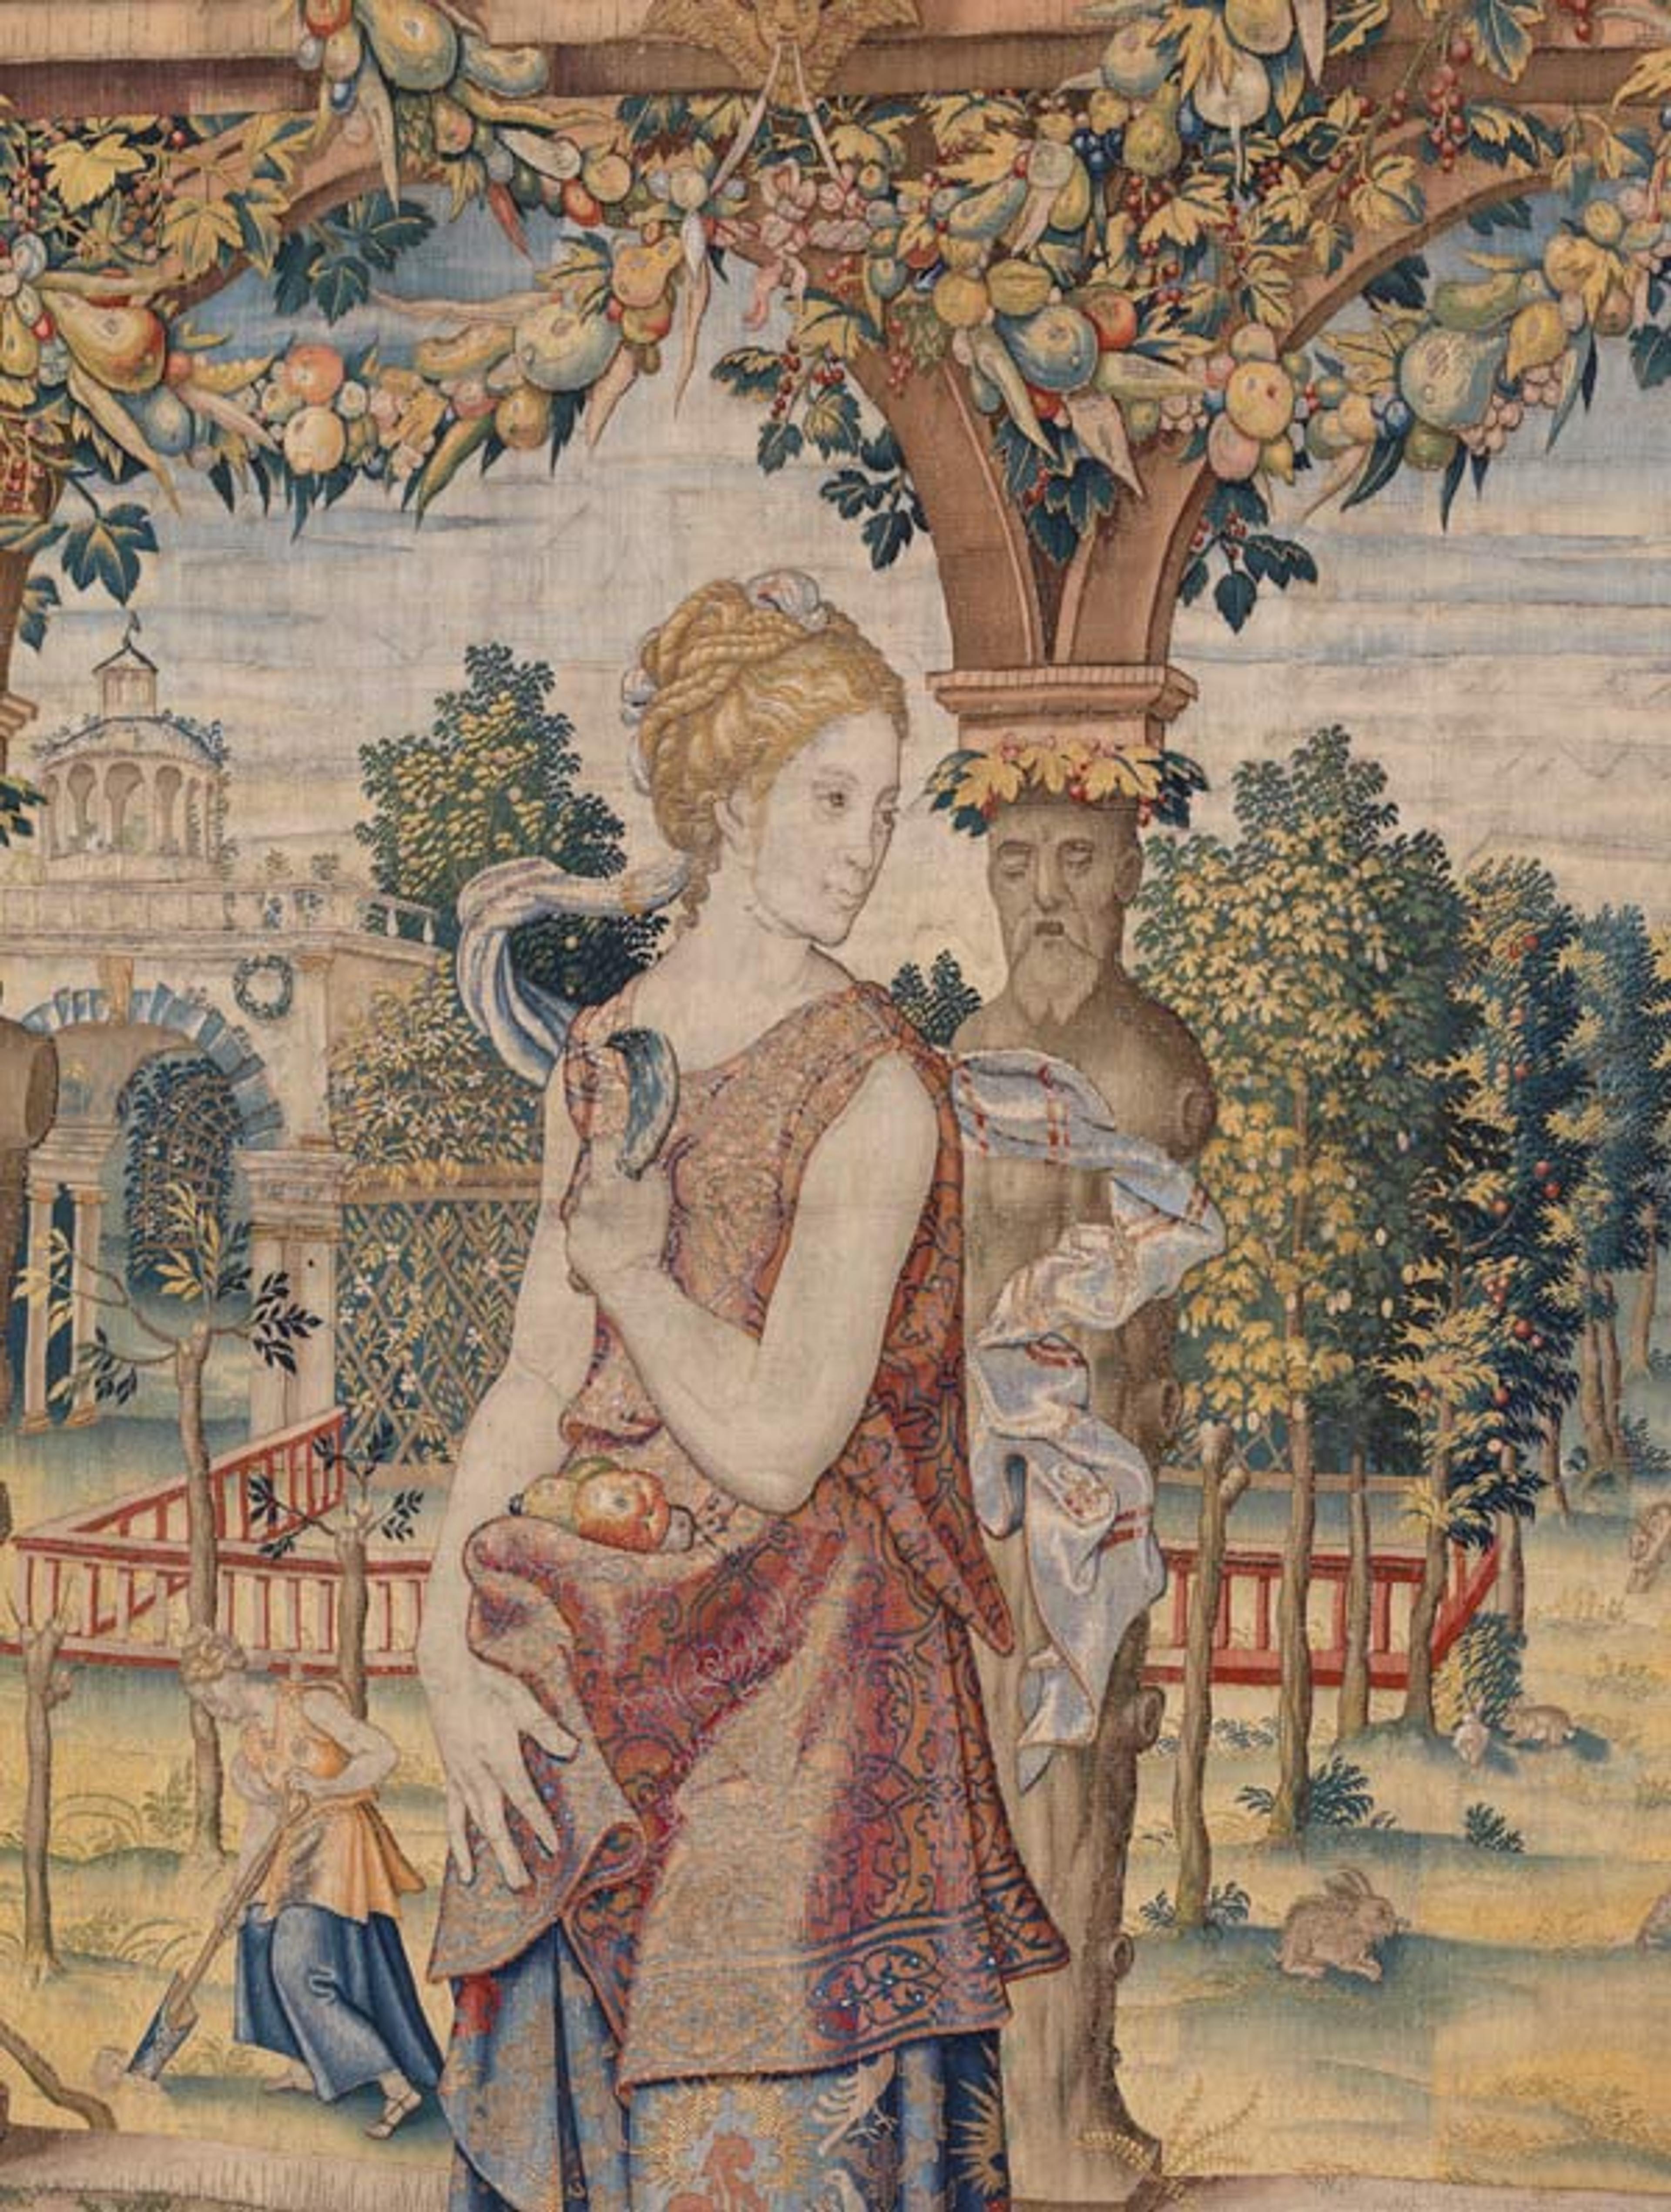 Detail of Pomona from Story of Vertumnus and Pomona: Vertumnus appears to Pomona in the guise of a Herdsman. Design attributed to Pieter Coecke van Aelst (Netherlandish, 1502–1550), ca. 1544. Tapestry woven under the direction of Willem de Pannemaker, Brussels, sometime between ca. 1548 and 1575. Wool, silk, gold and silver metal-wrapped threads; 164 1/2 x 211 in. (418 x 536 cm). Royal Palace, Madrid (TA-17/II, 10004061)